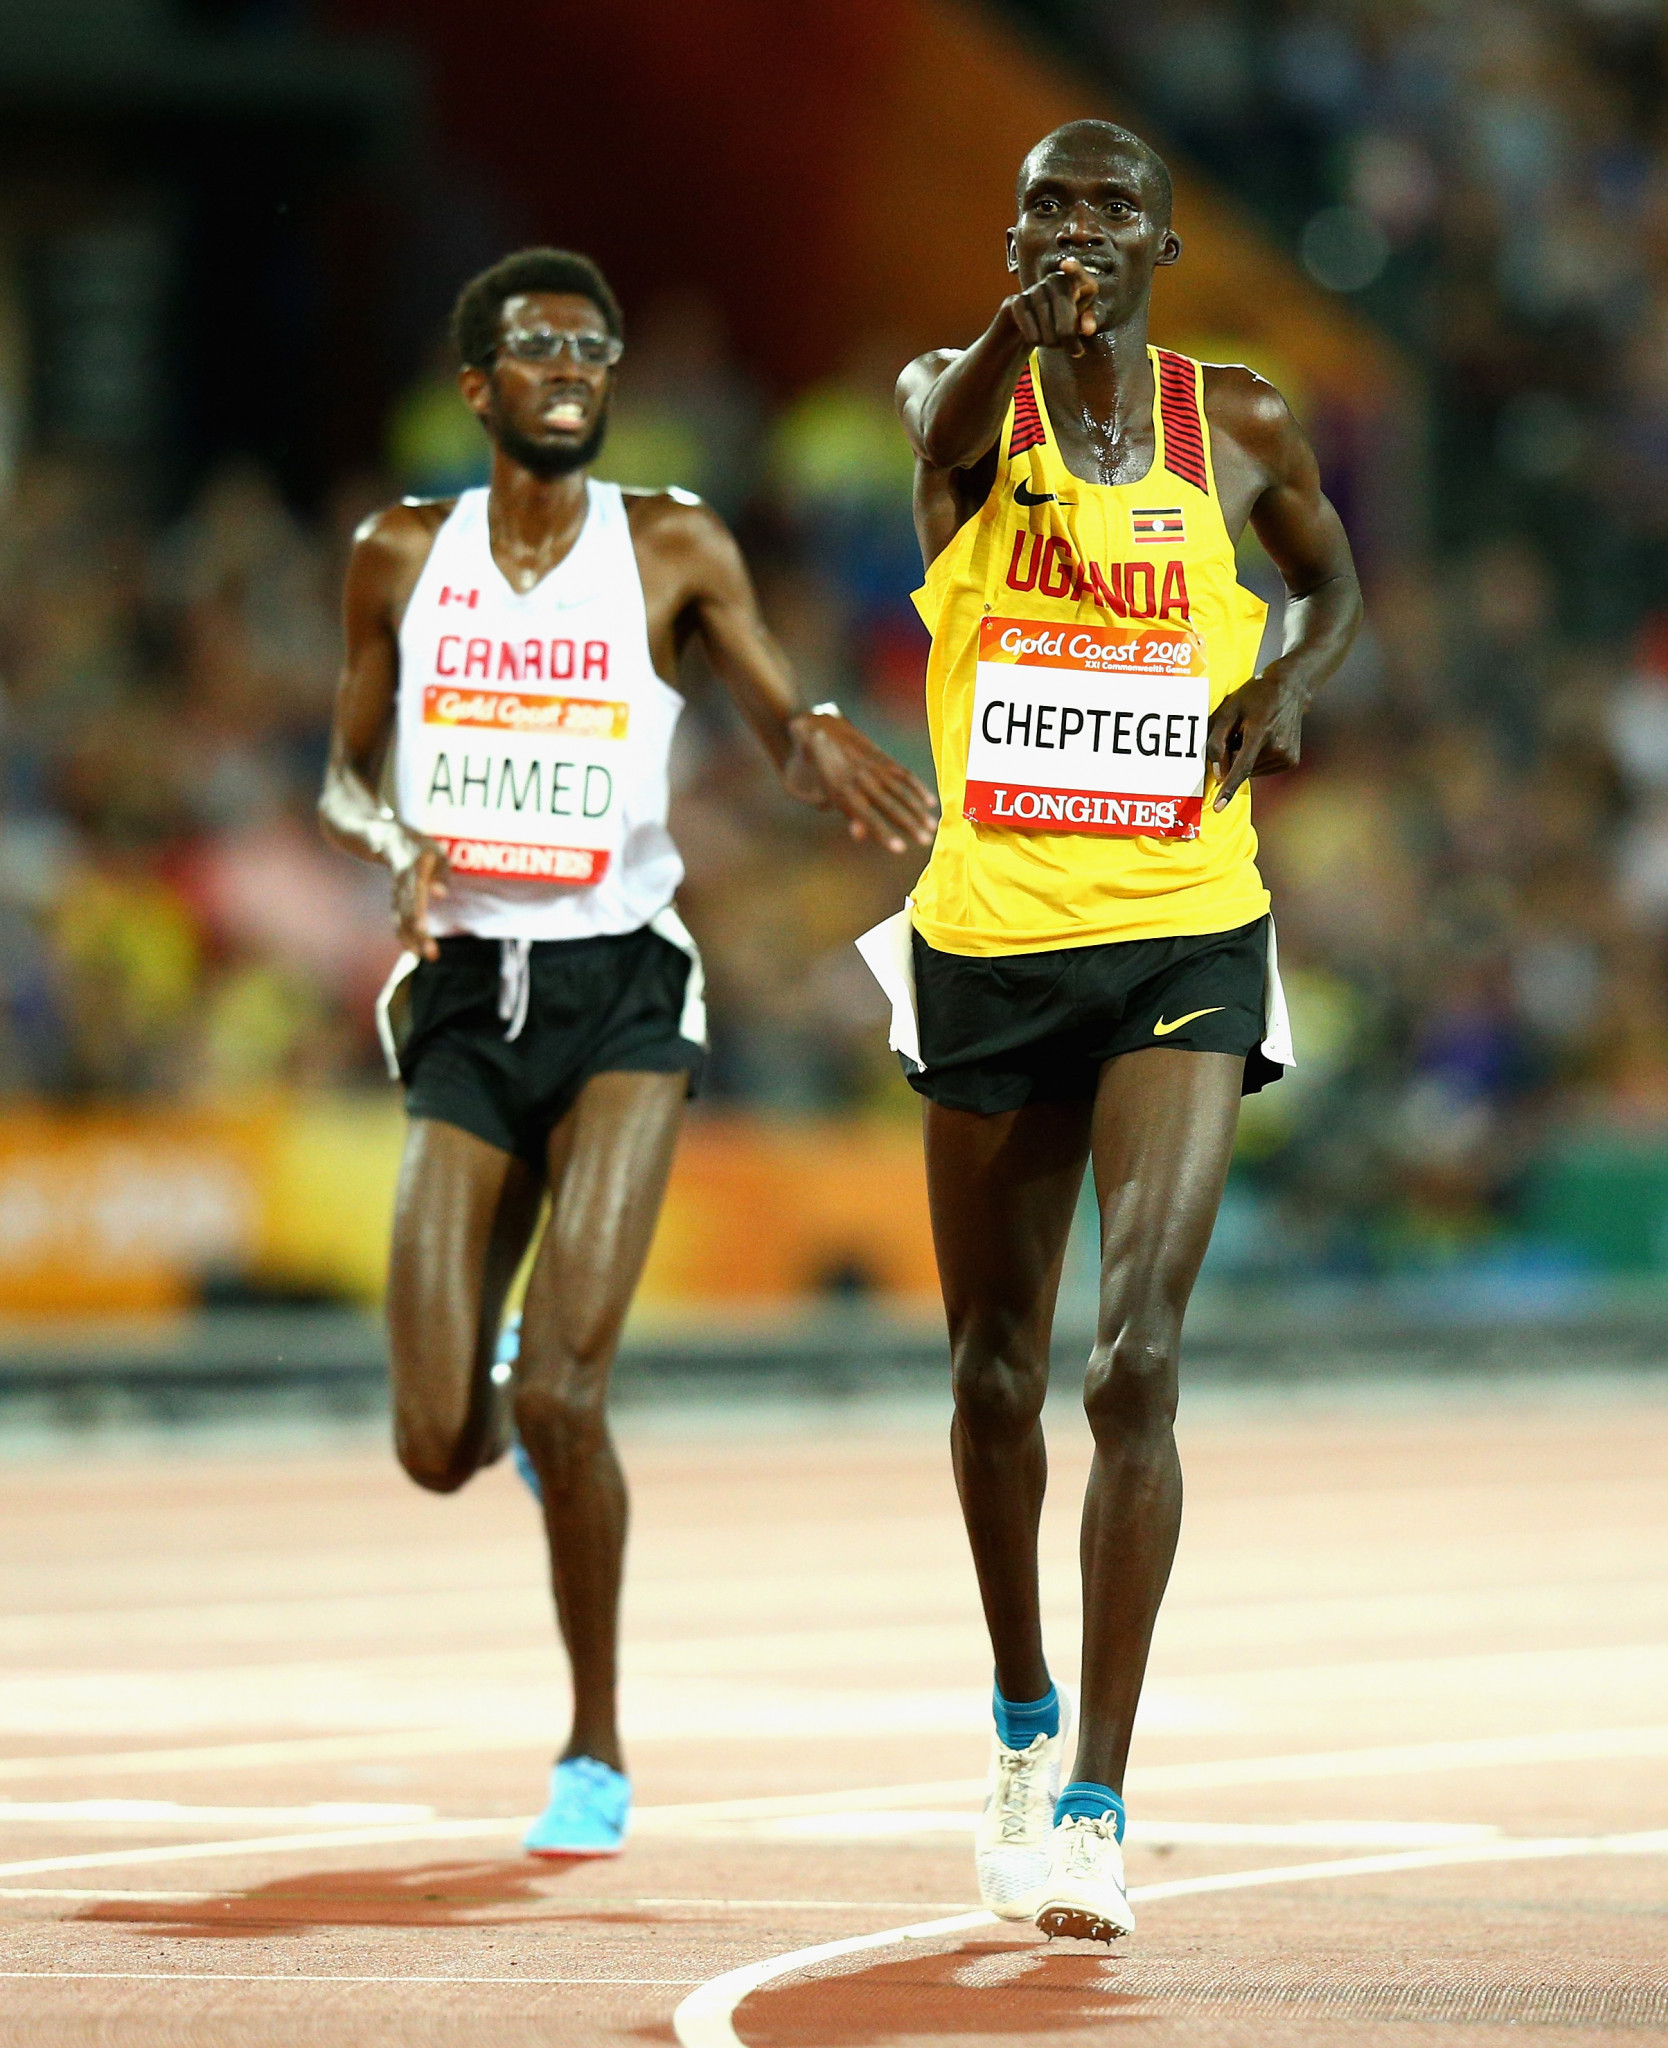 Joshua Cheptegei of Uganda outsprinted Mohammed Ahmed of Canada ©Getty Images